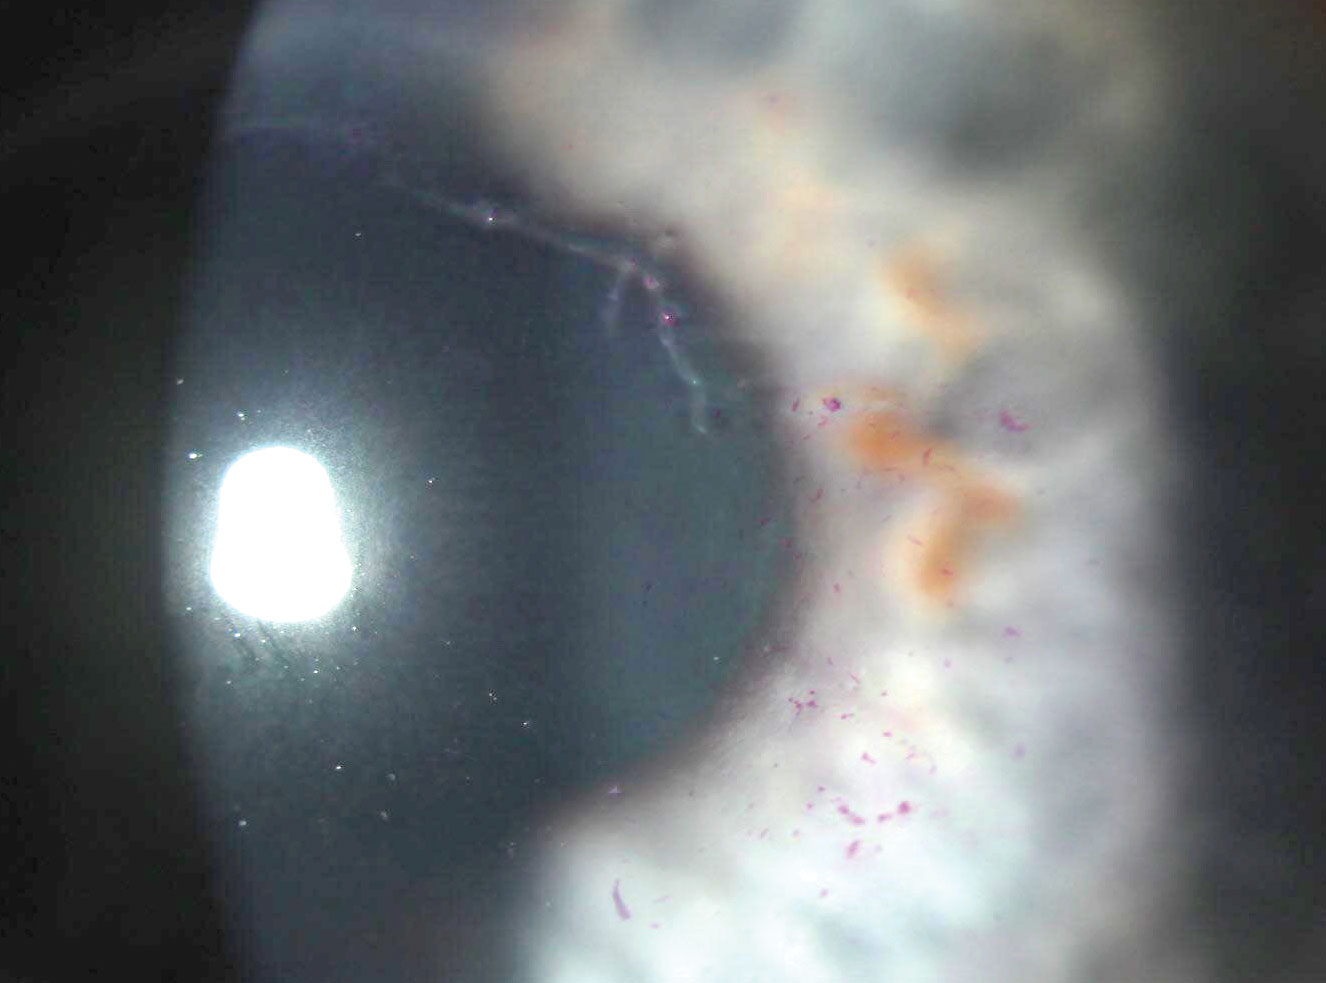 Pseudodendrite seen with HZO. This occurred two weeks after the beginning of a shingles rash involving the brow of this patient. Note that the lesion is not ulcerated and only stains with rose bengal in a patchy manner.